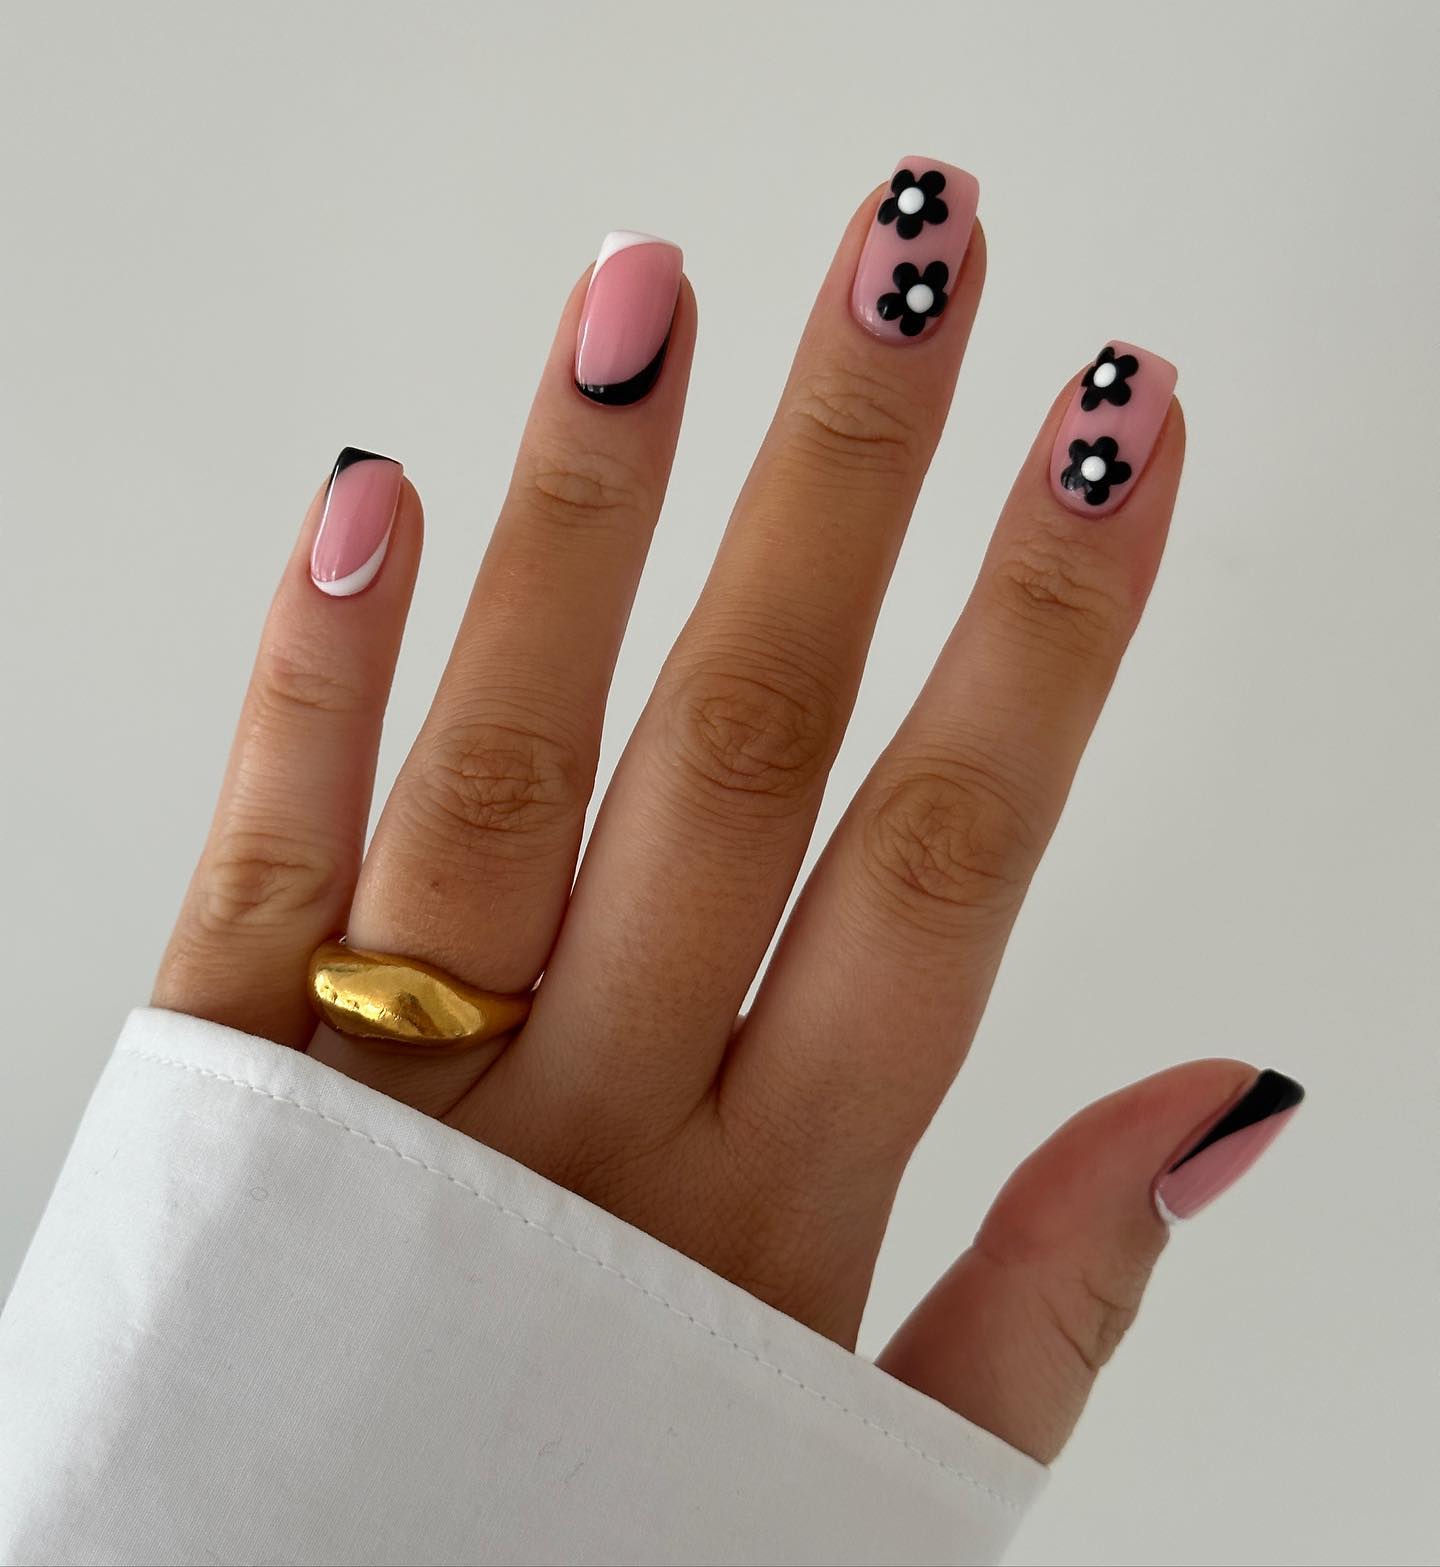 100 Irresistibly Cute Nail Art Designs For A Fun and Lively Manicure